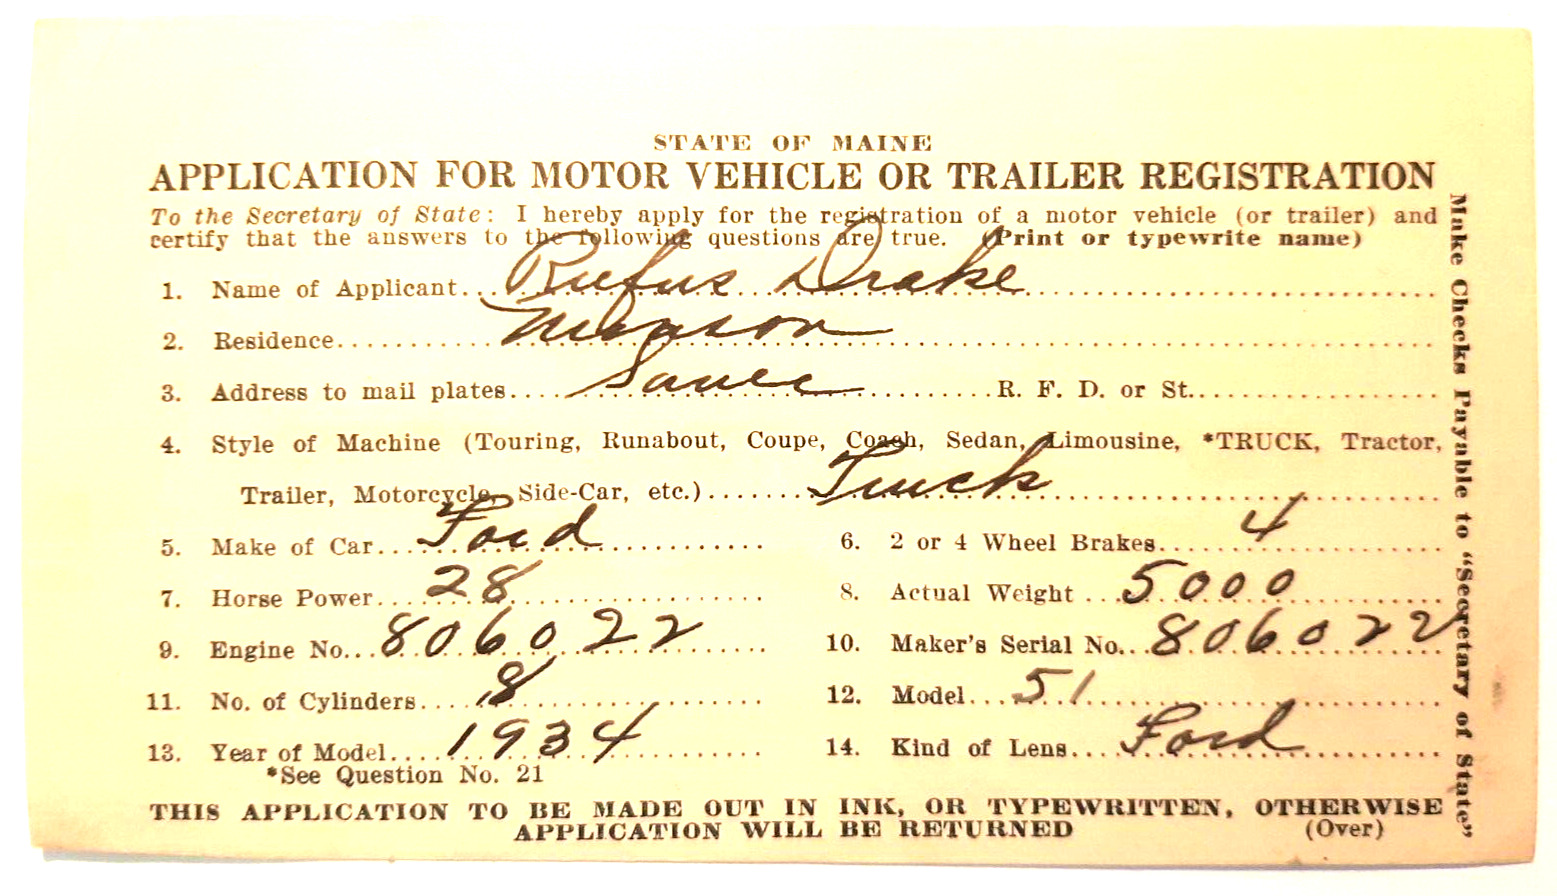 1936 Application for Motor Vehicle or Trailer Registration State of Maine